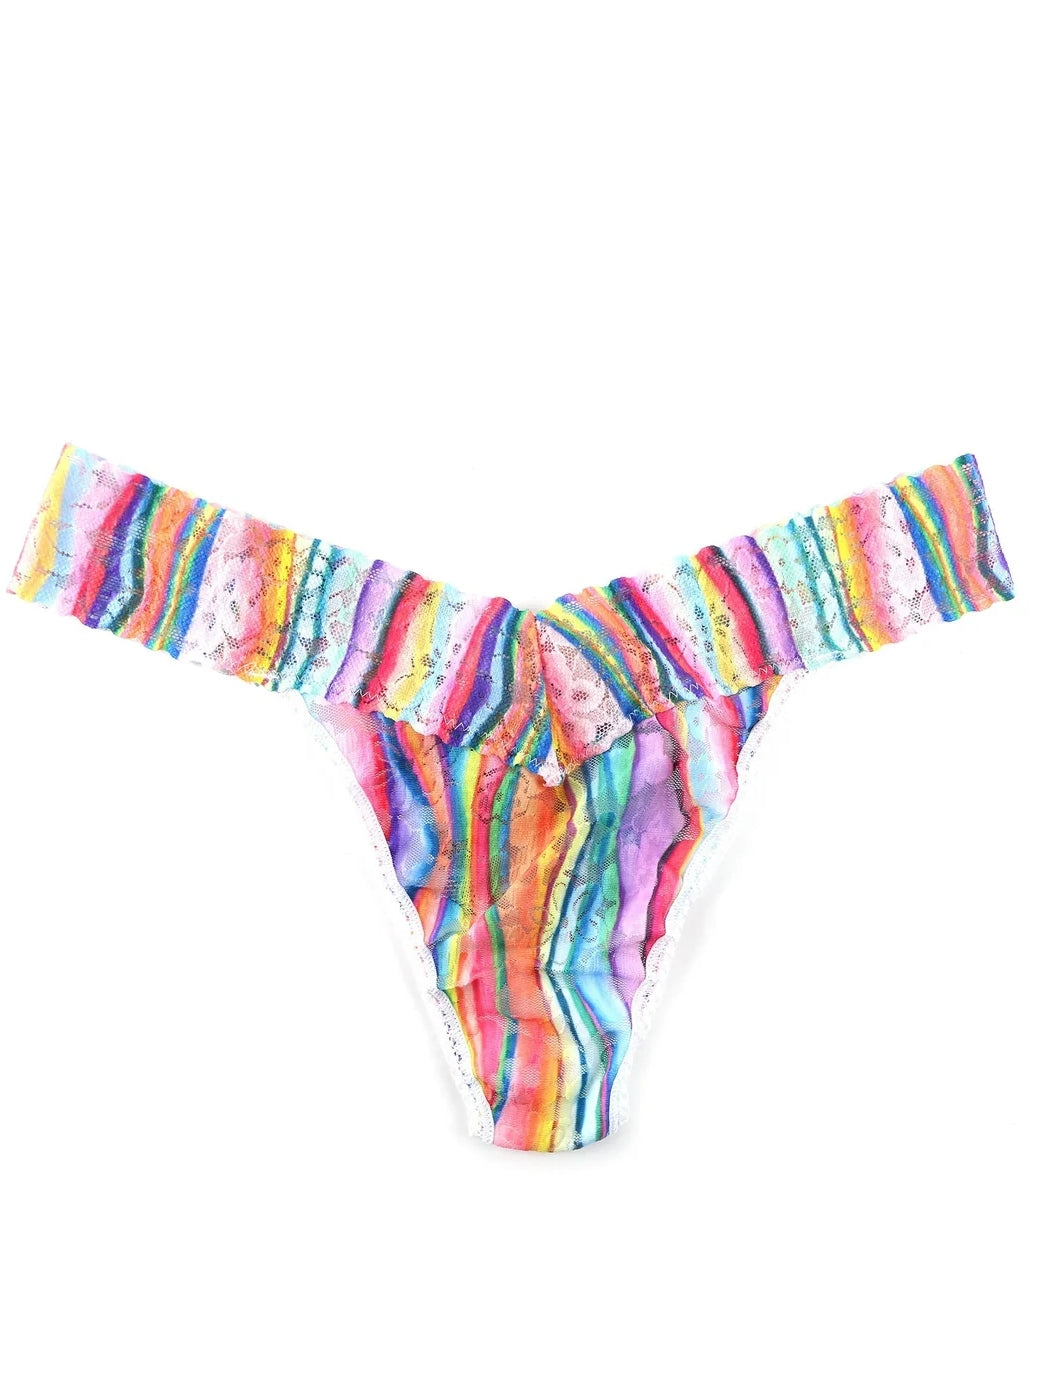 Printed Daily Lace Original Rise Thong in Aura